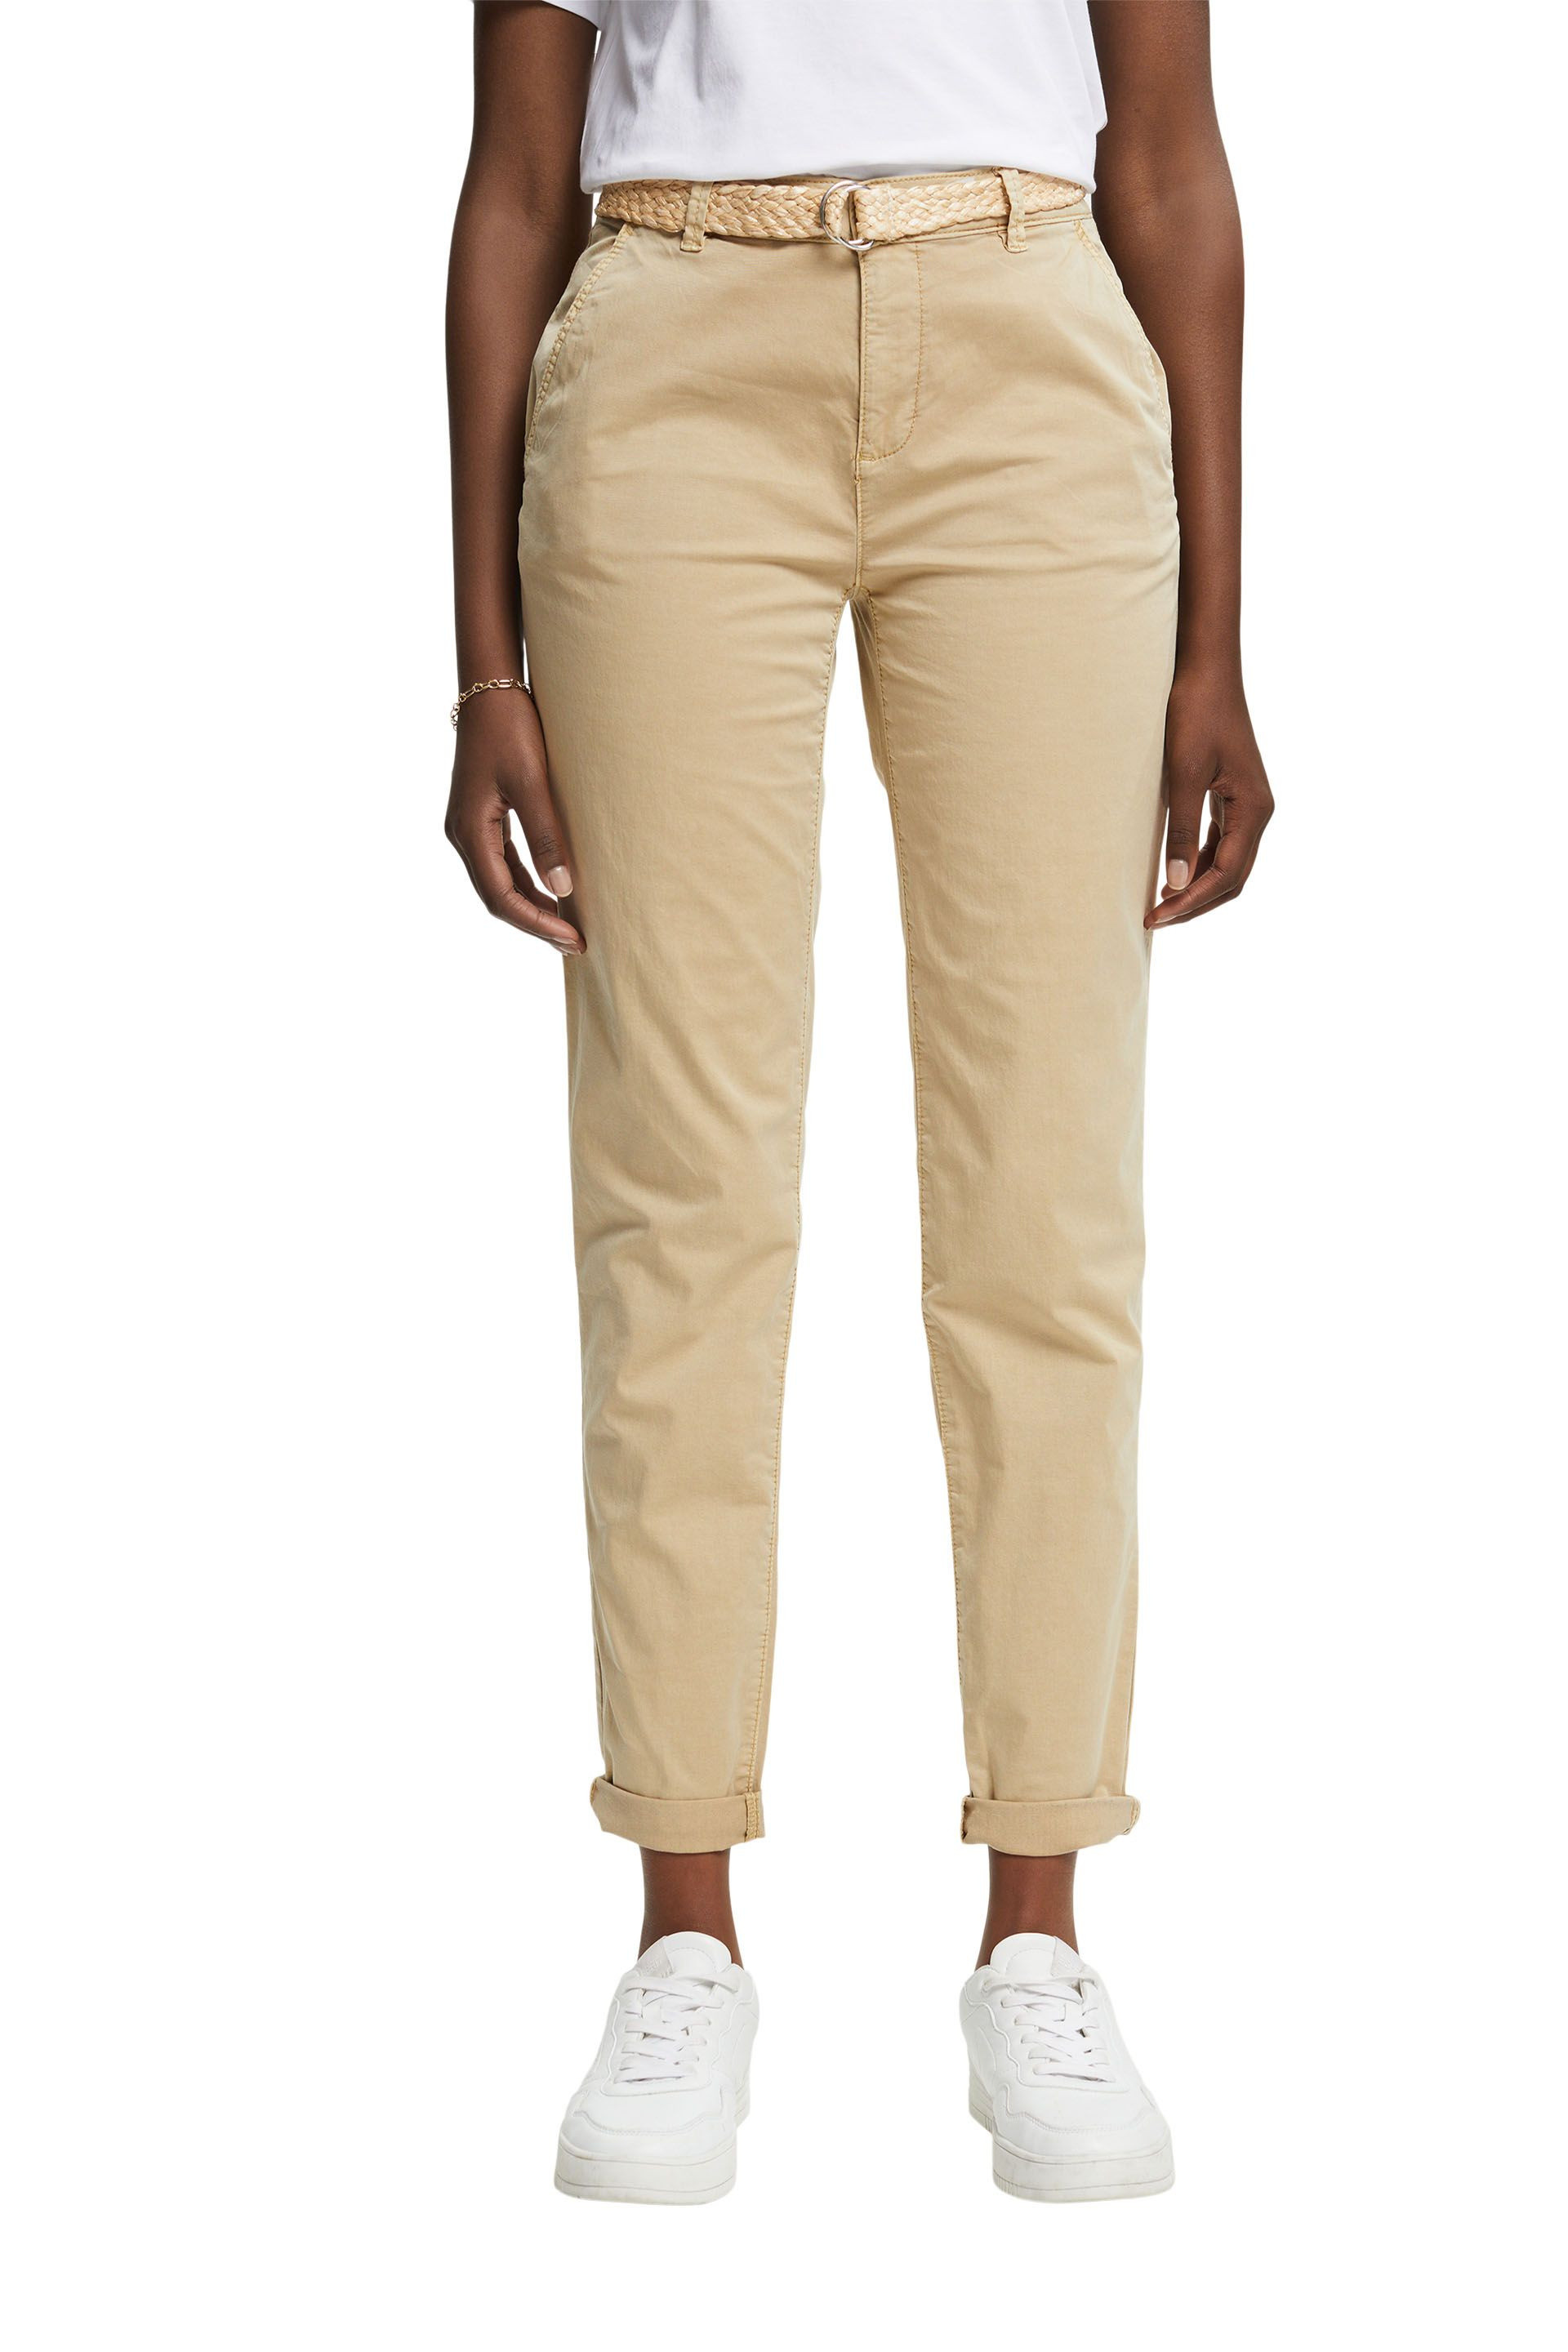 Esprit - Cropped chinos with belt, Sand, large image number 1